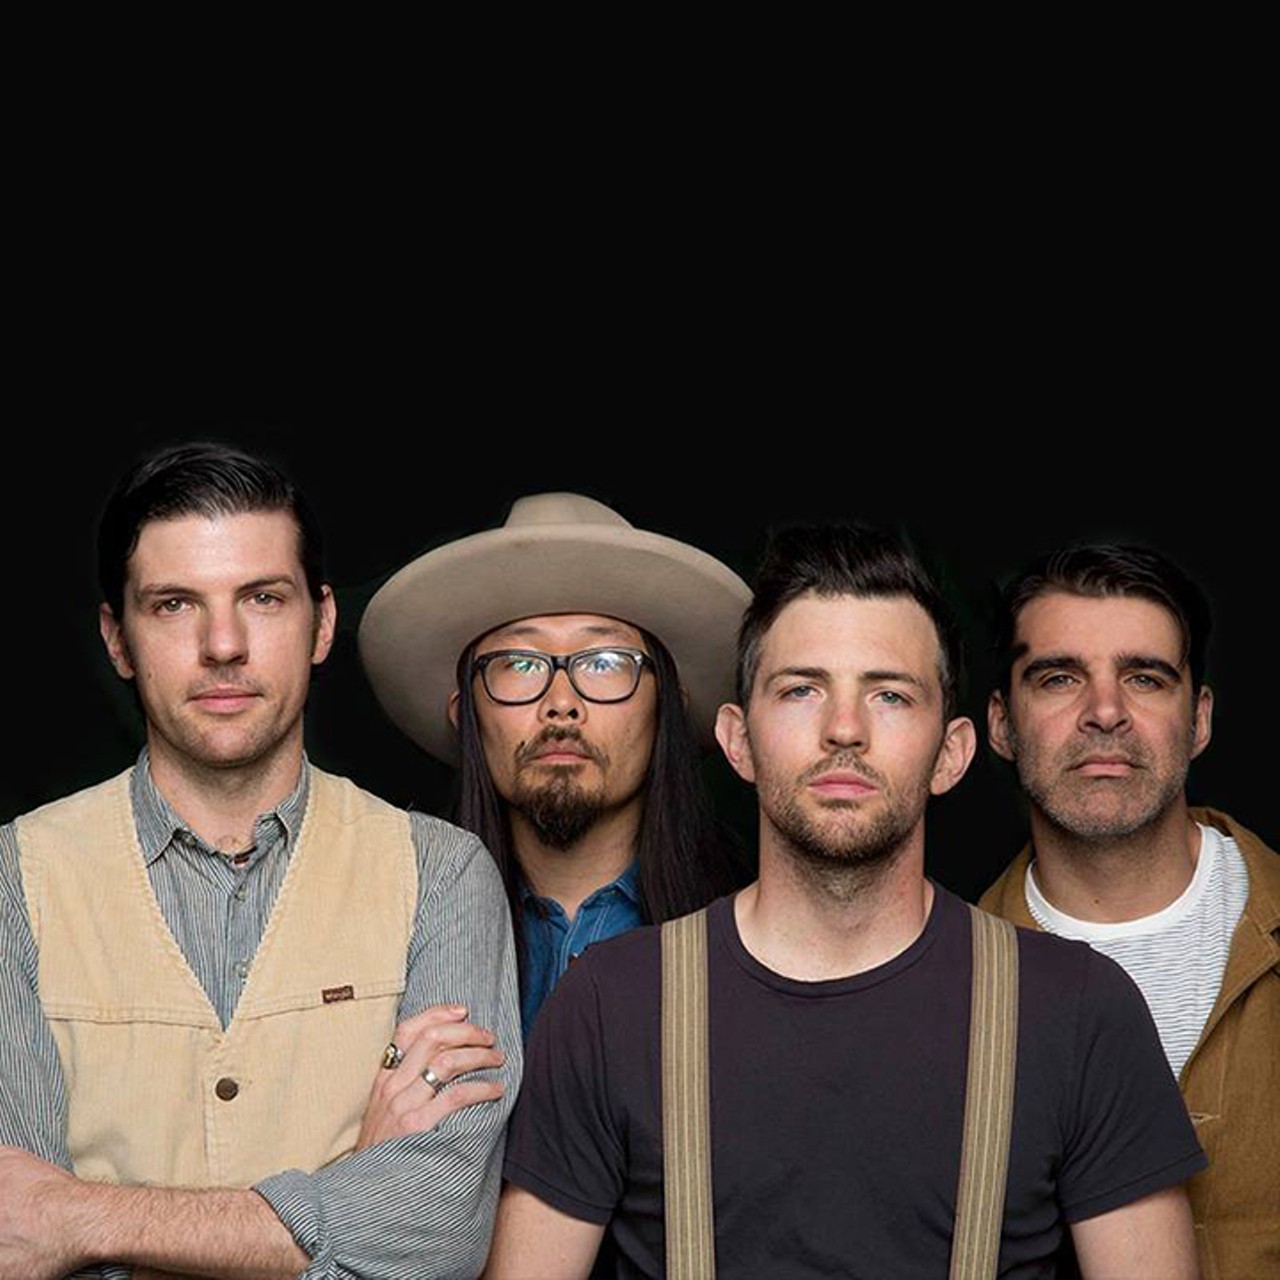 Thursday, May 25The Avett Brothers at House of Blues